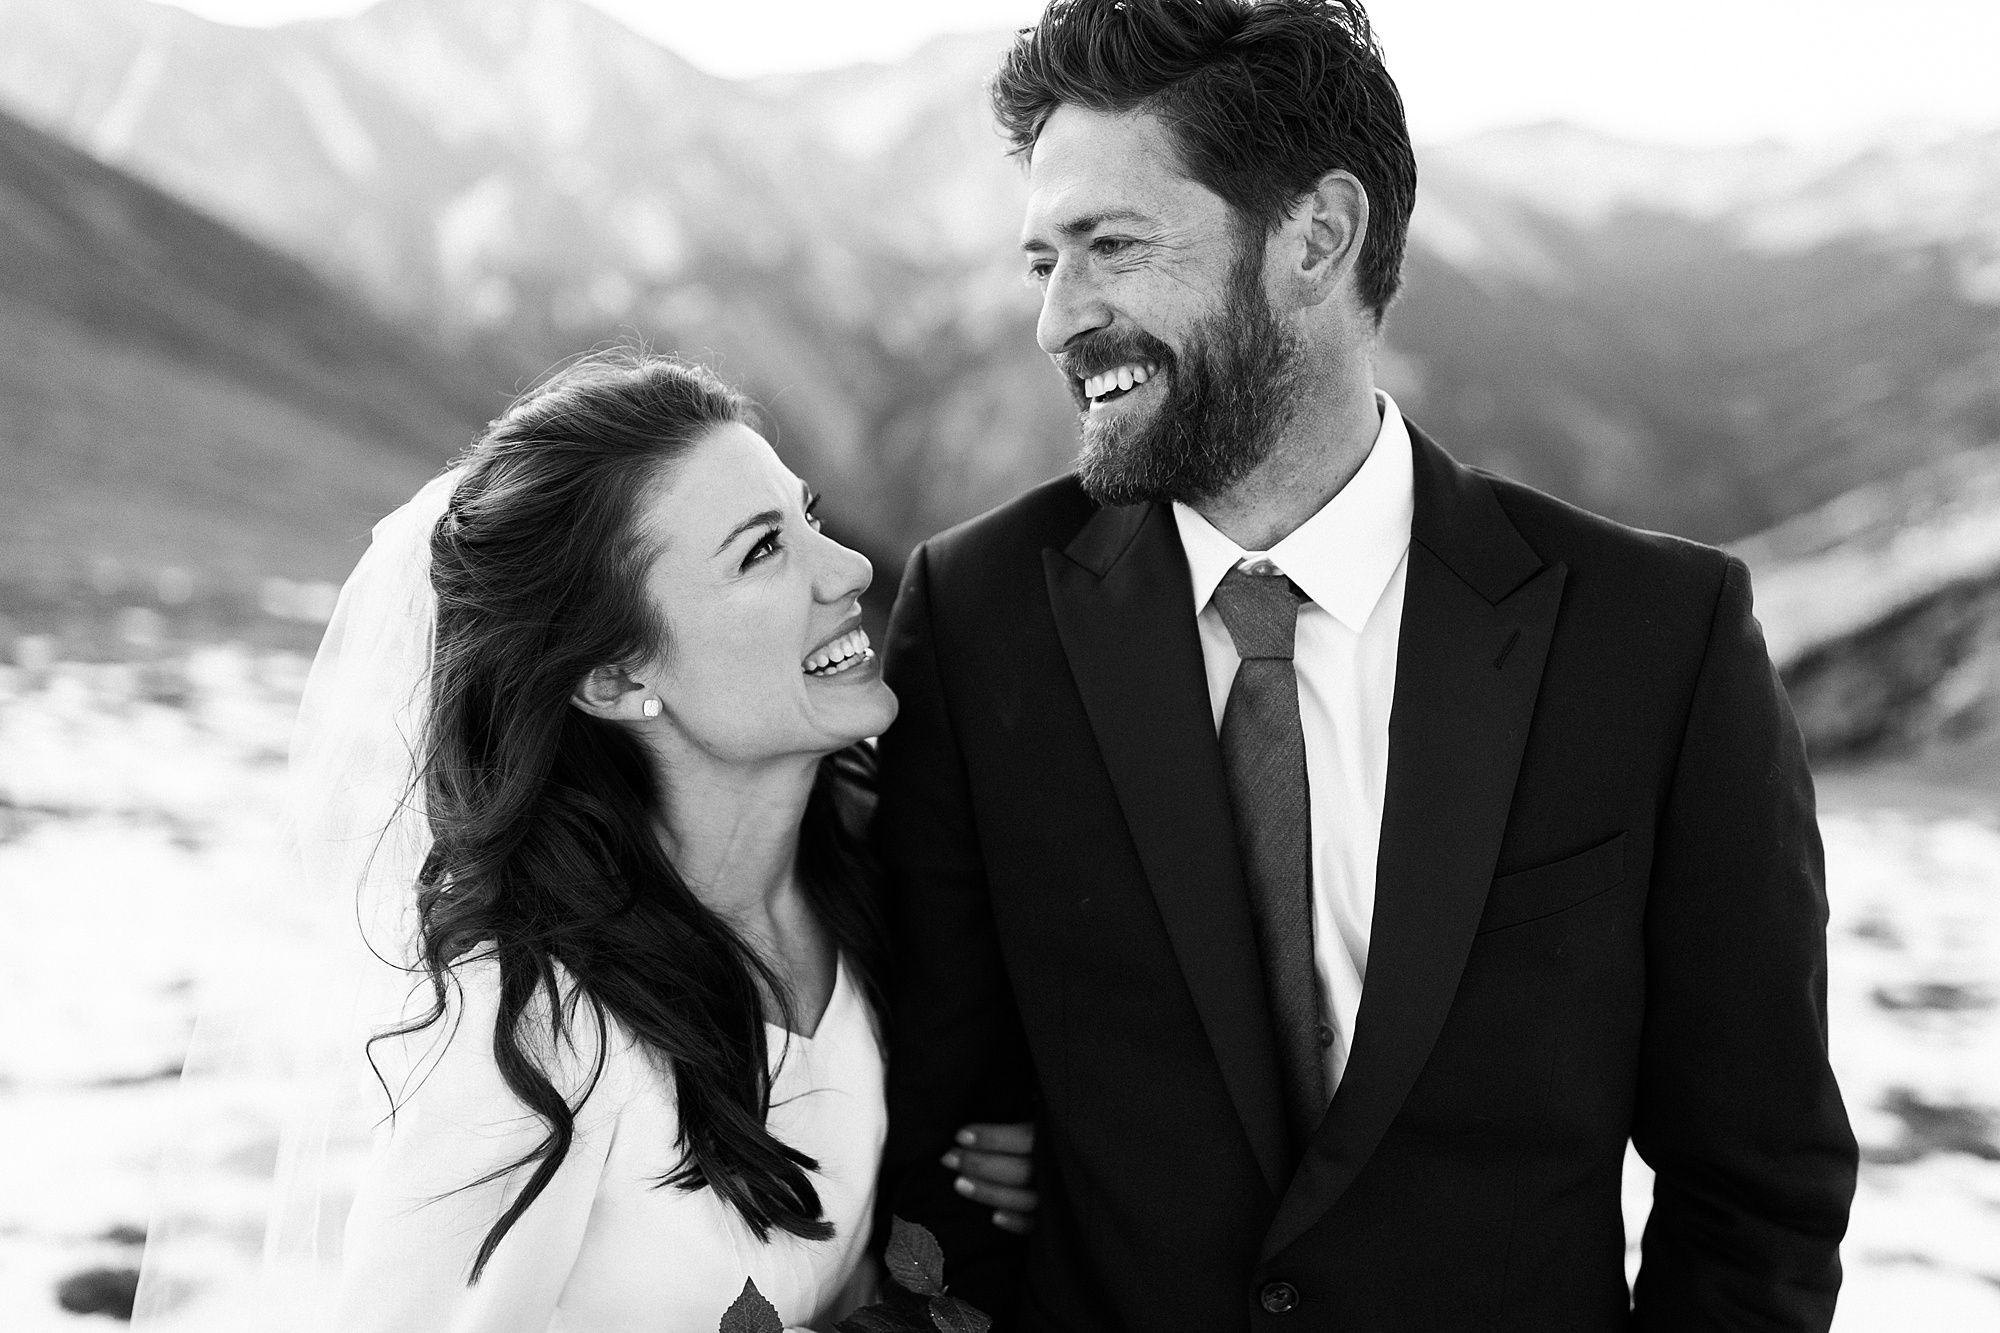 black and white portrait of bride and groom on mountain